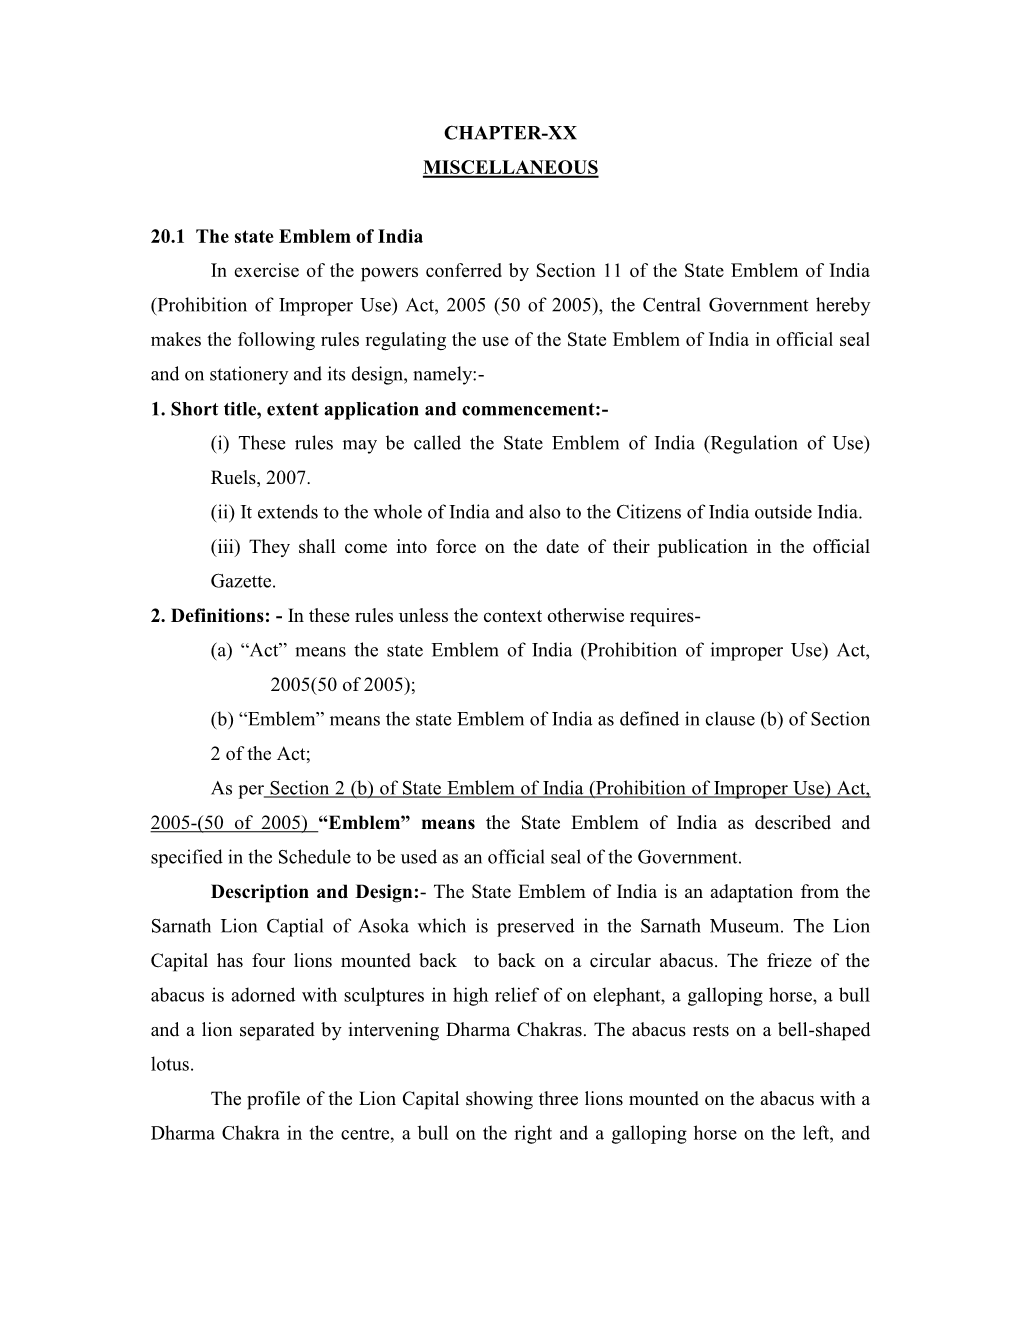 CHAPTER-XX MISCELLANEOUS 20.1 the State Emblem of India in Exercise of the Powers Conferred by Section 11 of the State Emblem O